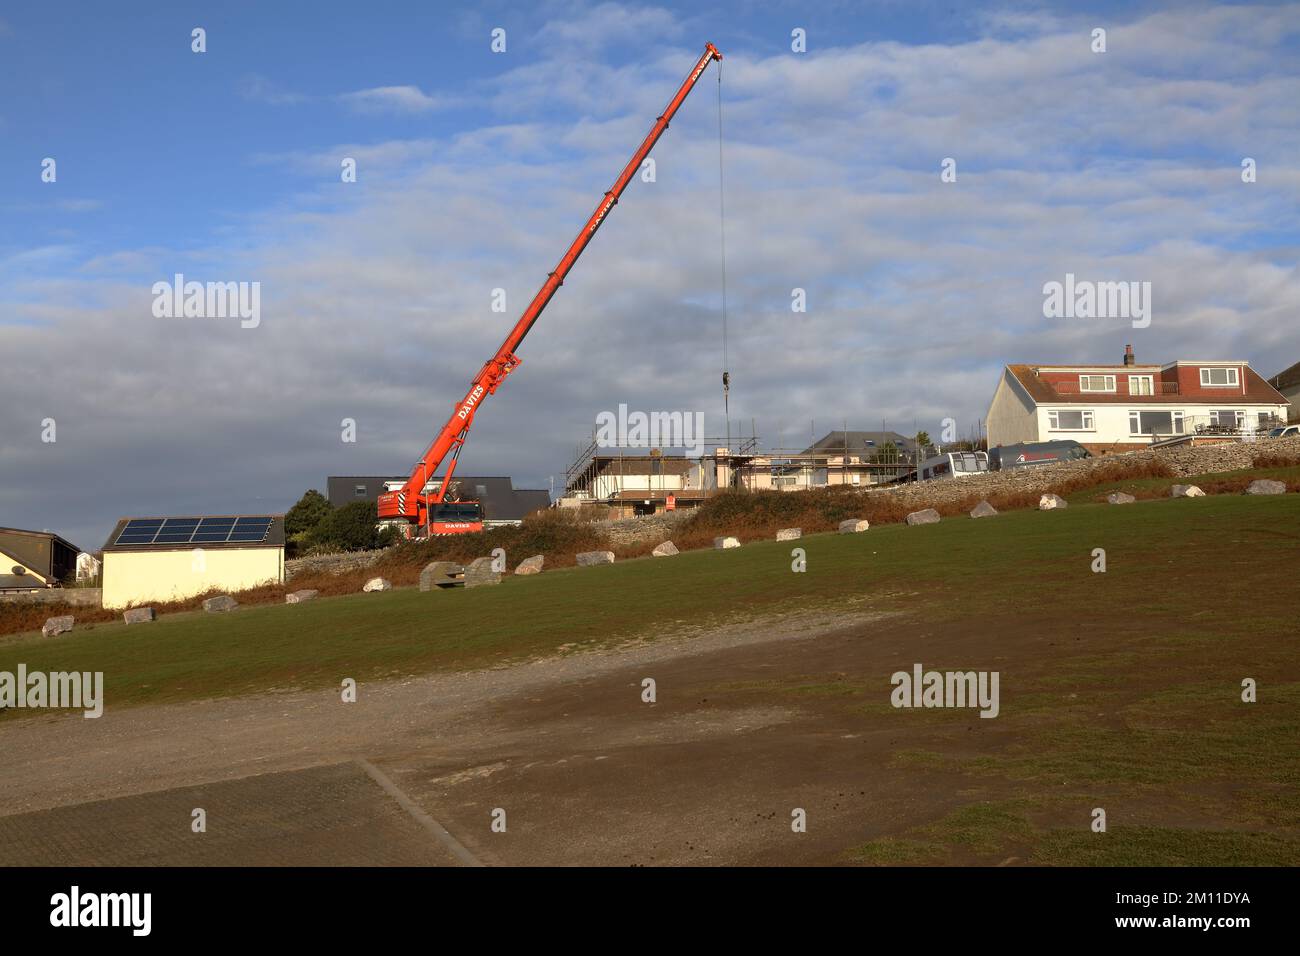 A huge Crane preparing to lift a series of steel beams into position on a house that is being rebuilt in a small village location by the sea. Stock Photo